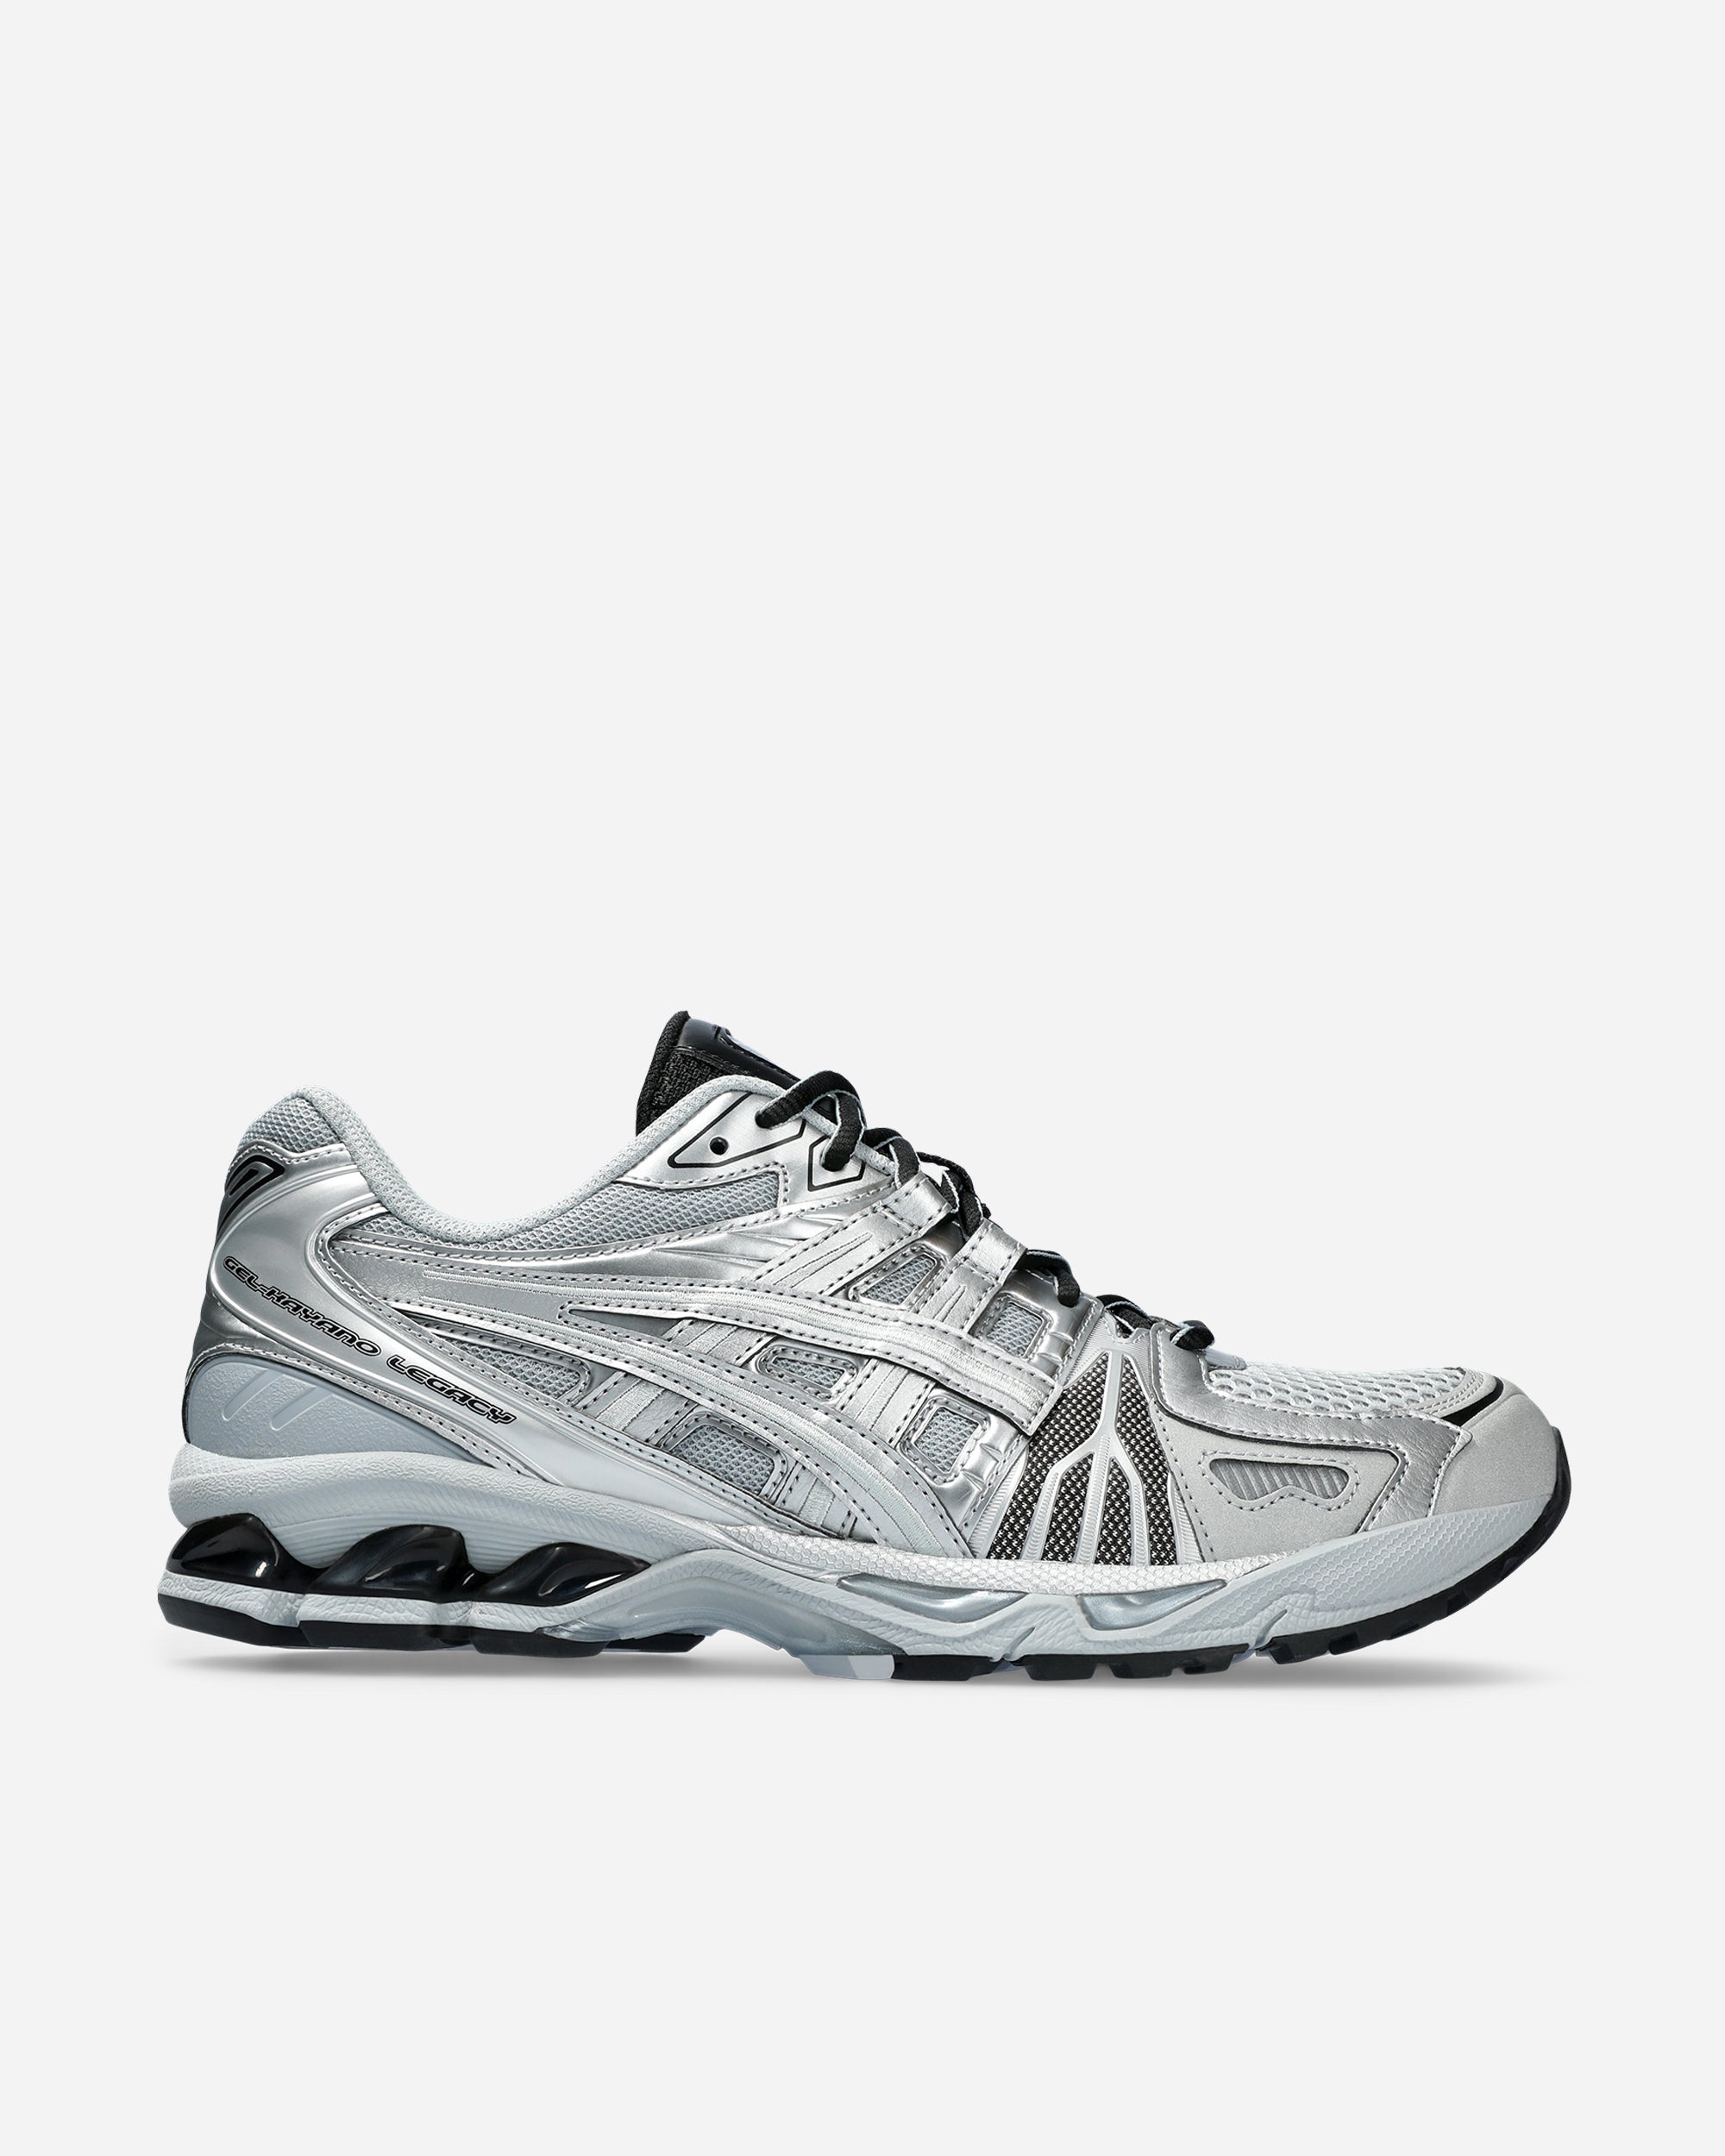 Asics GEL-Kayano Legacy PURE SILVER/PURE SILVER 1203A325-020